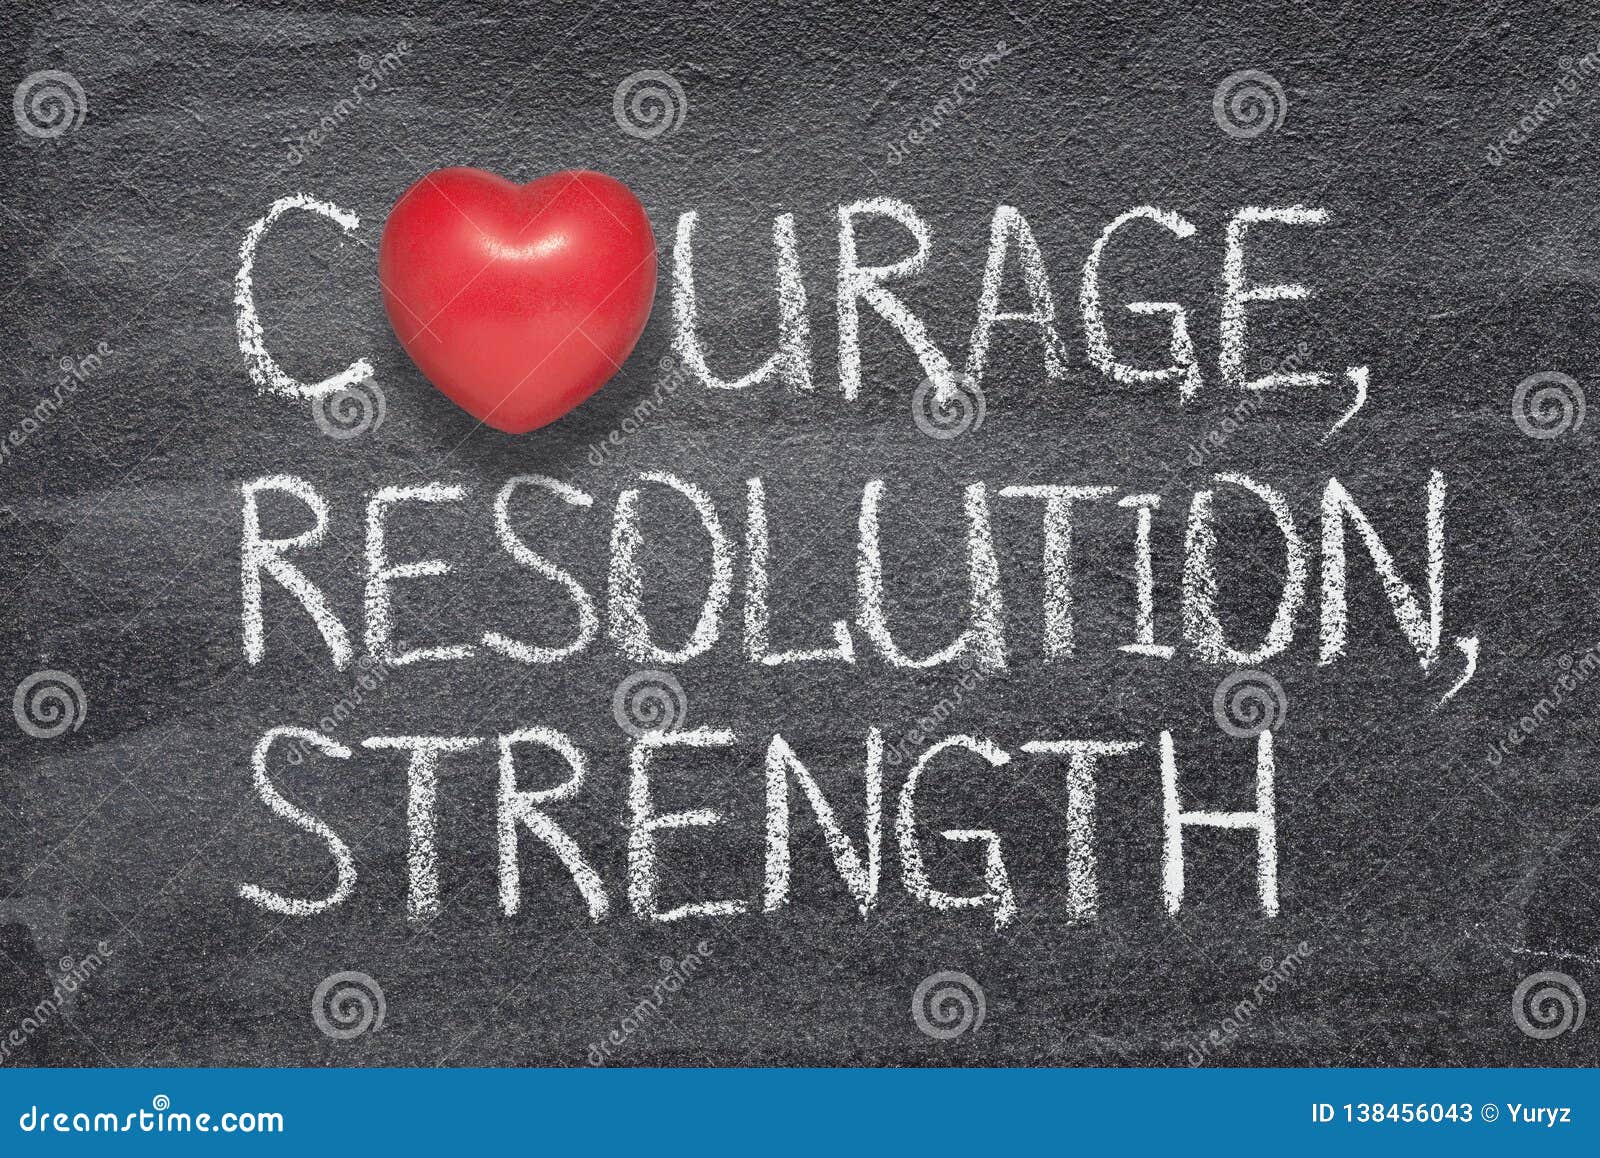 Courage, Resolution, Strength Stock Image - Image of heart, resolution ...